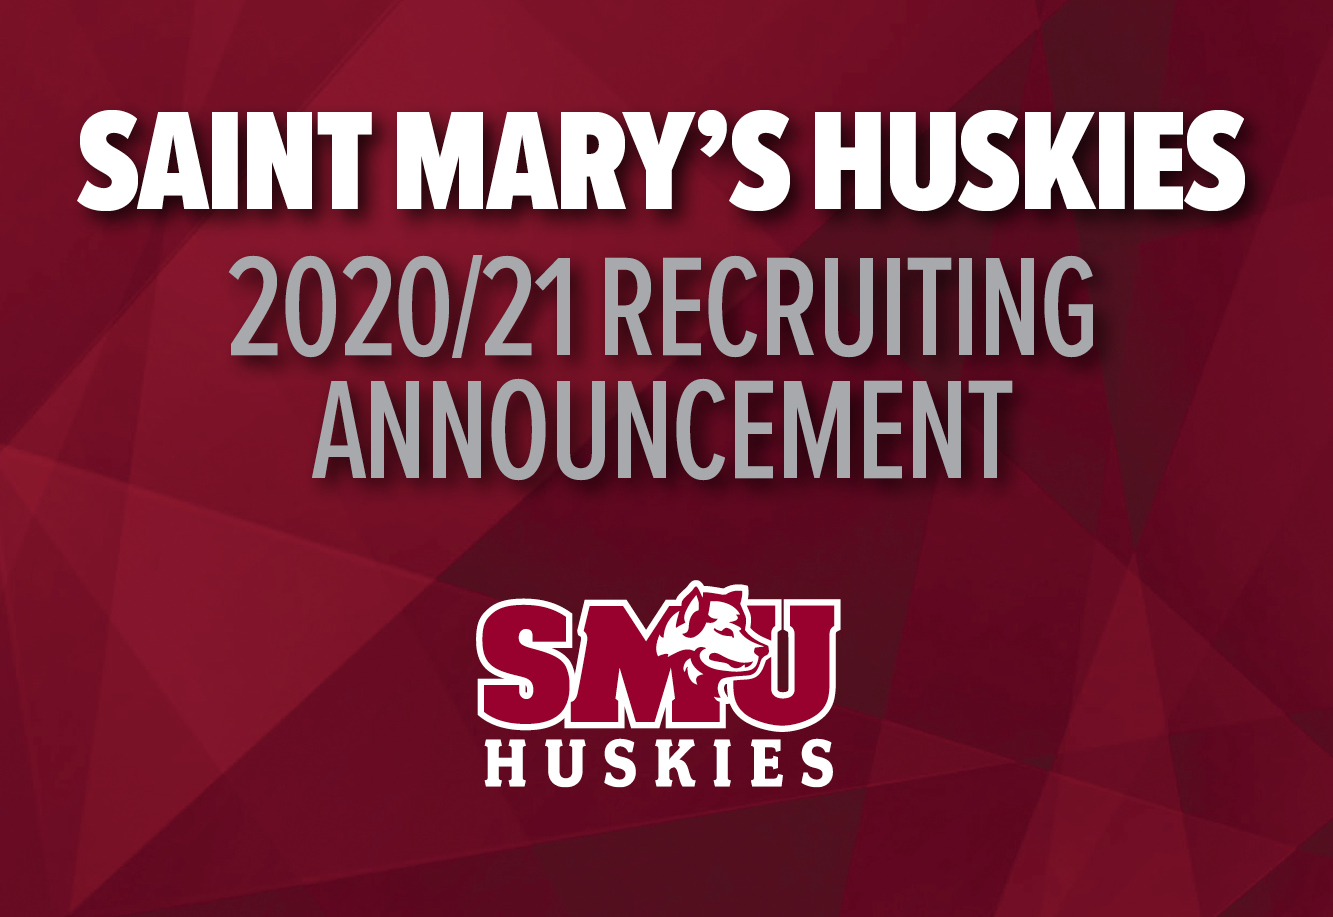 Women's Hockey welcome four recruits to 2020/21 lineup